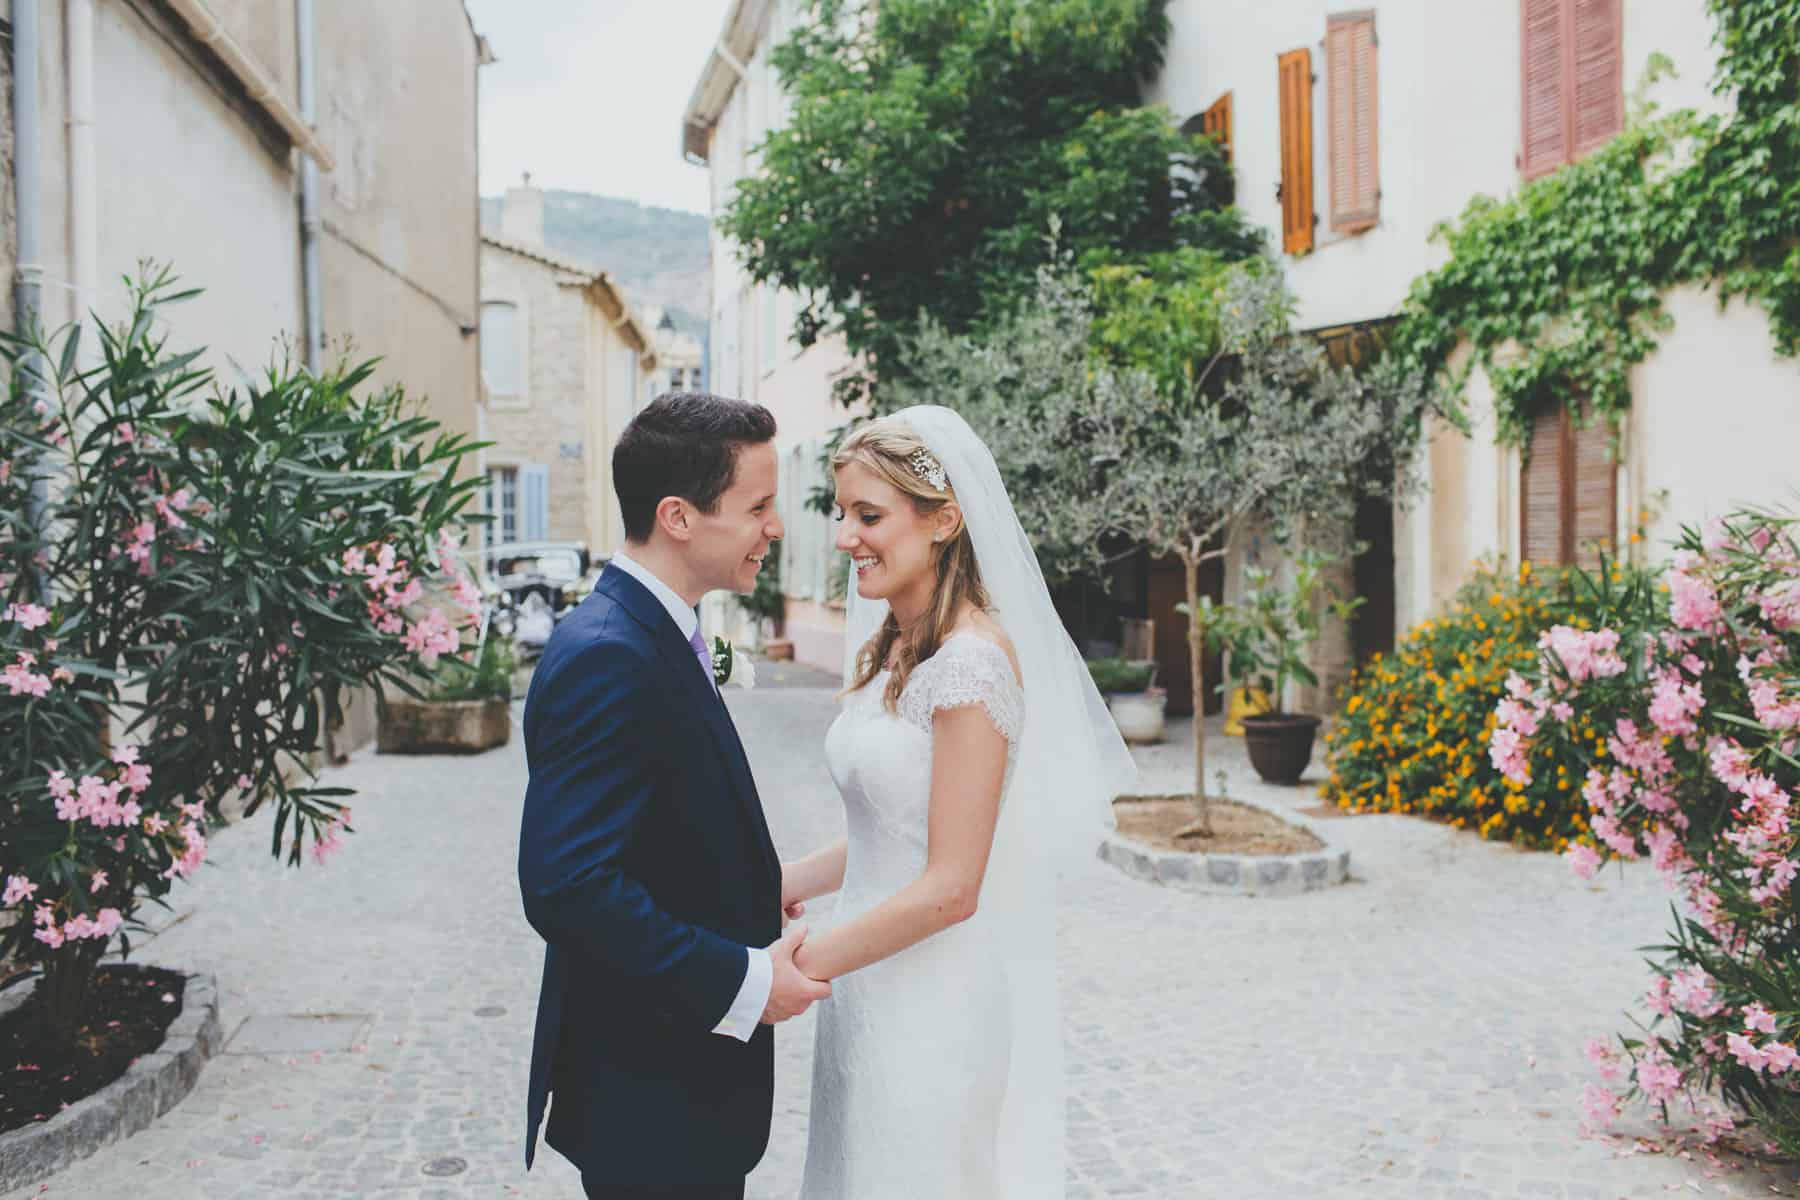 Lucy & James // South of France